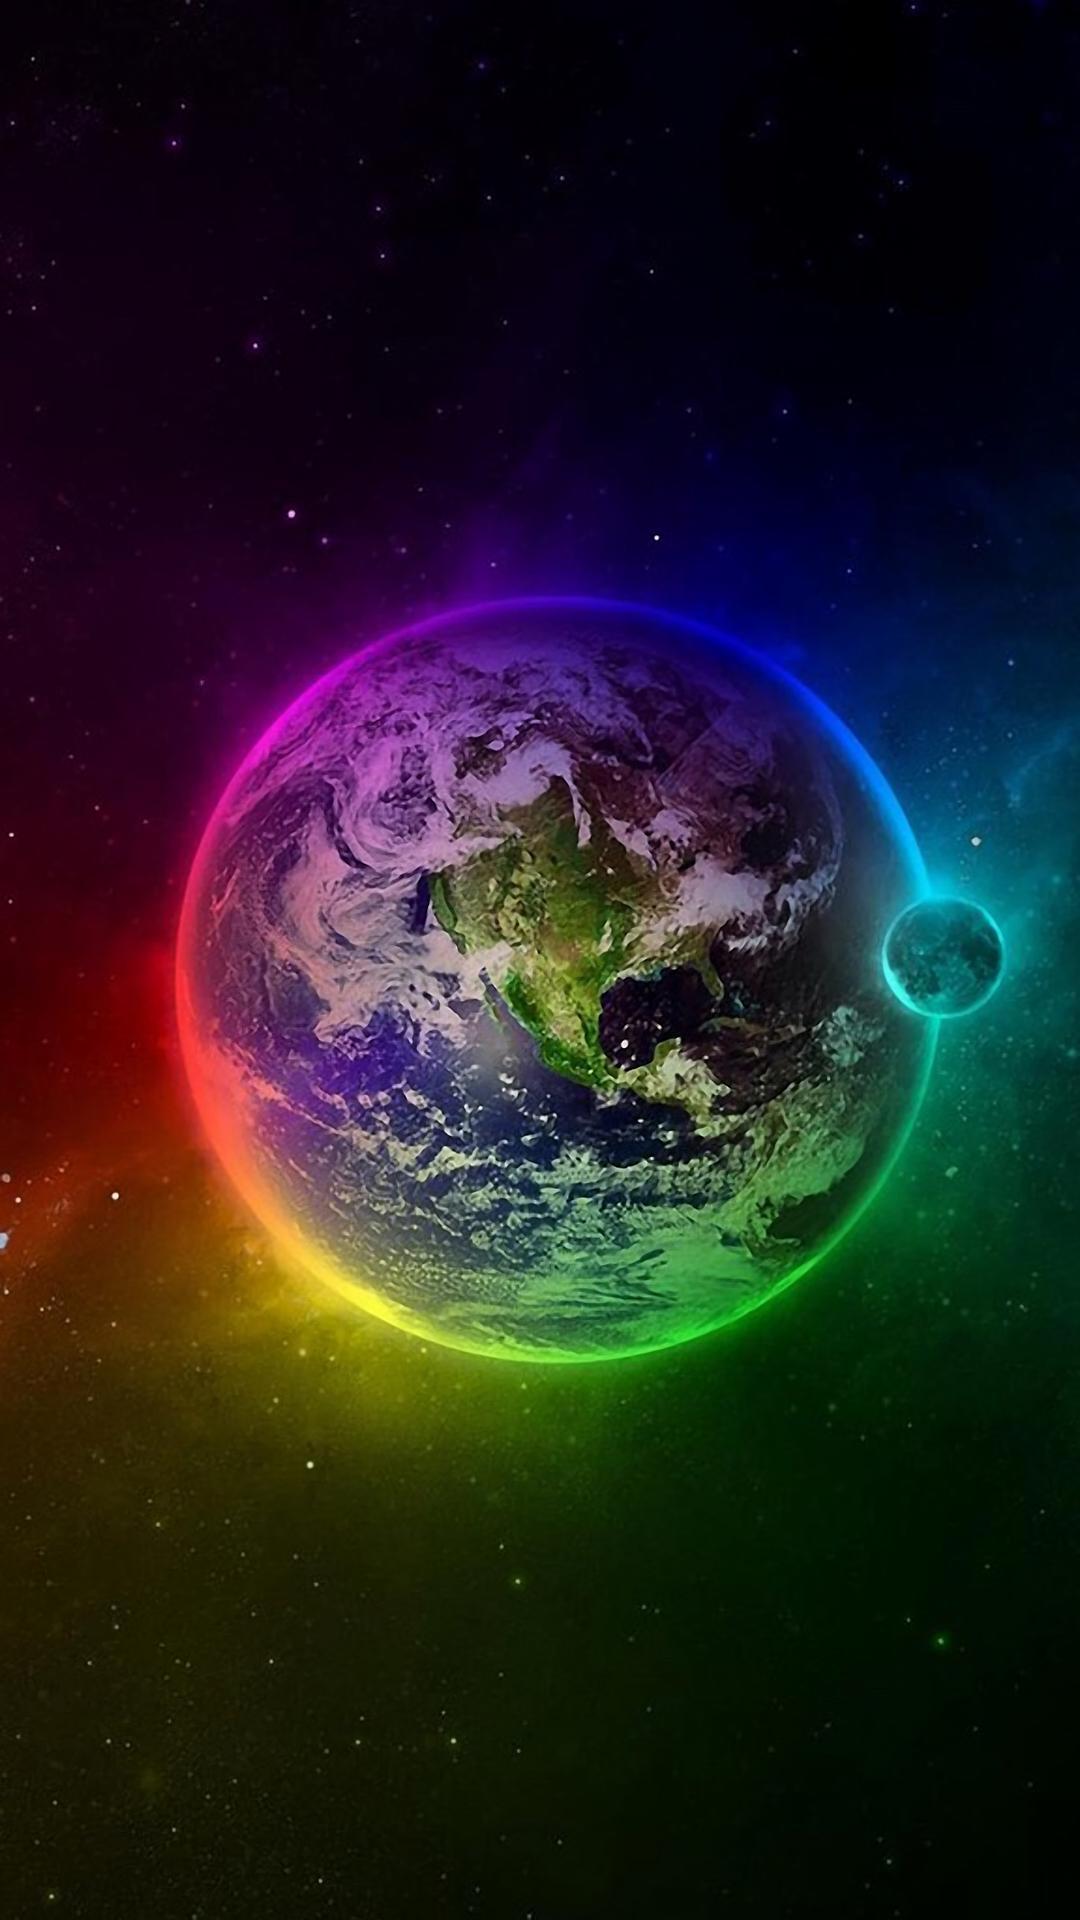 250+ Planet wallpapers HD | Download Free backgrounds